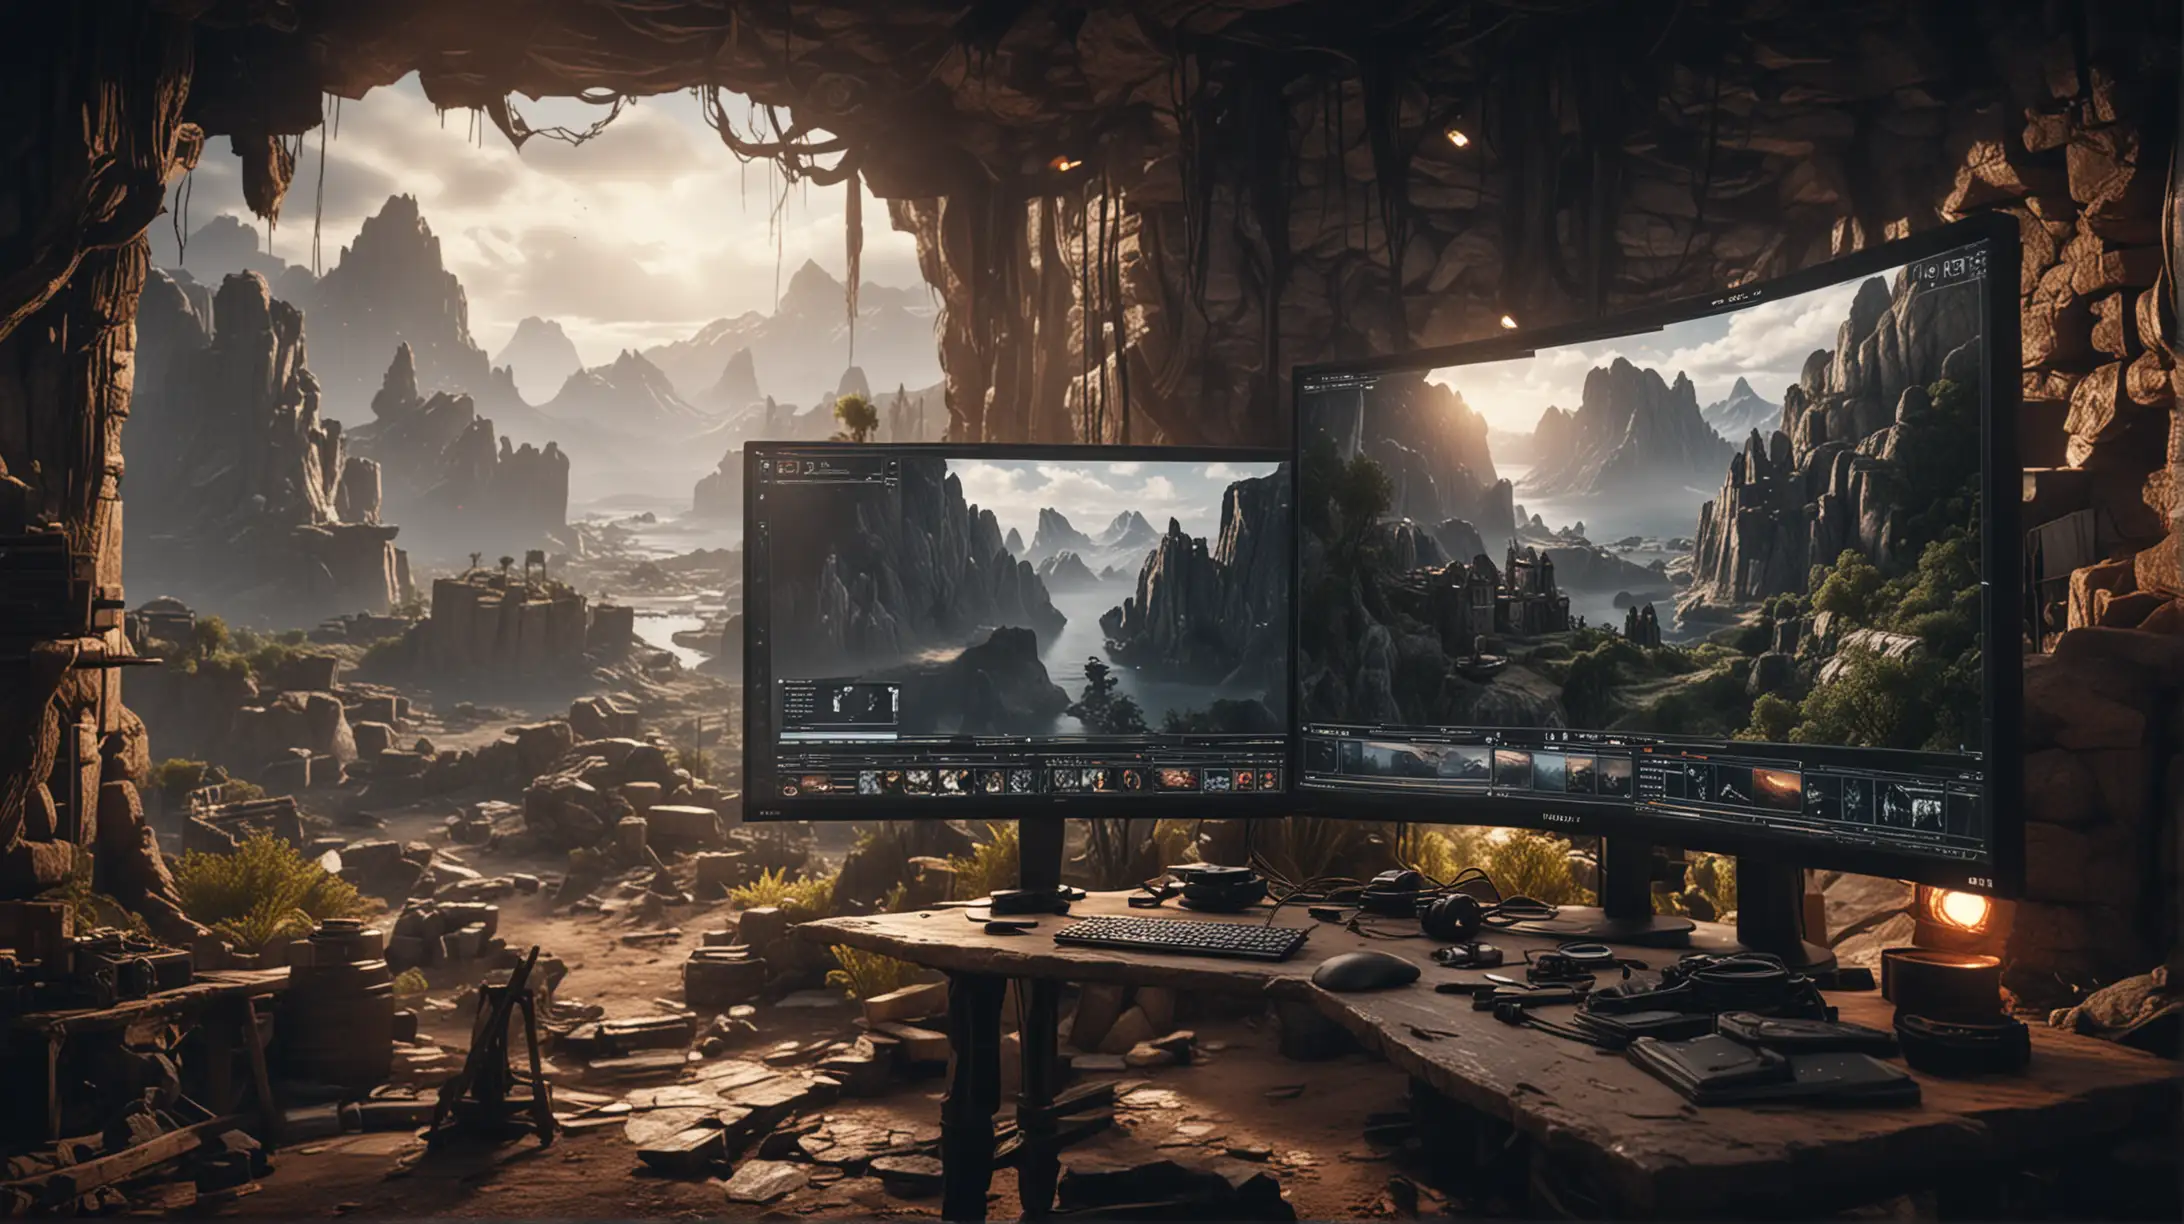 cinematic image showing world building unreal engine film production, show the unreal interface, monitor in front